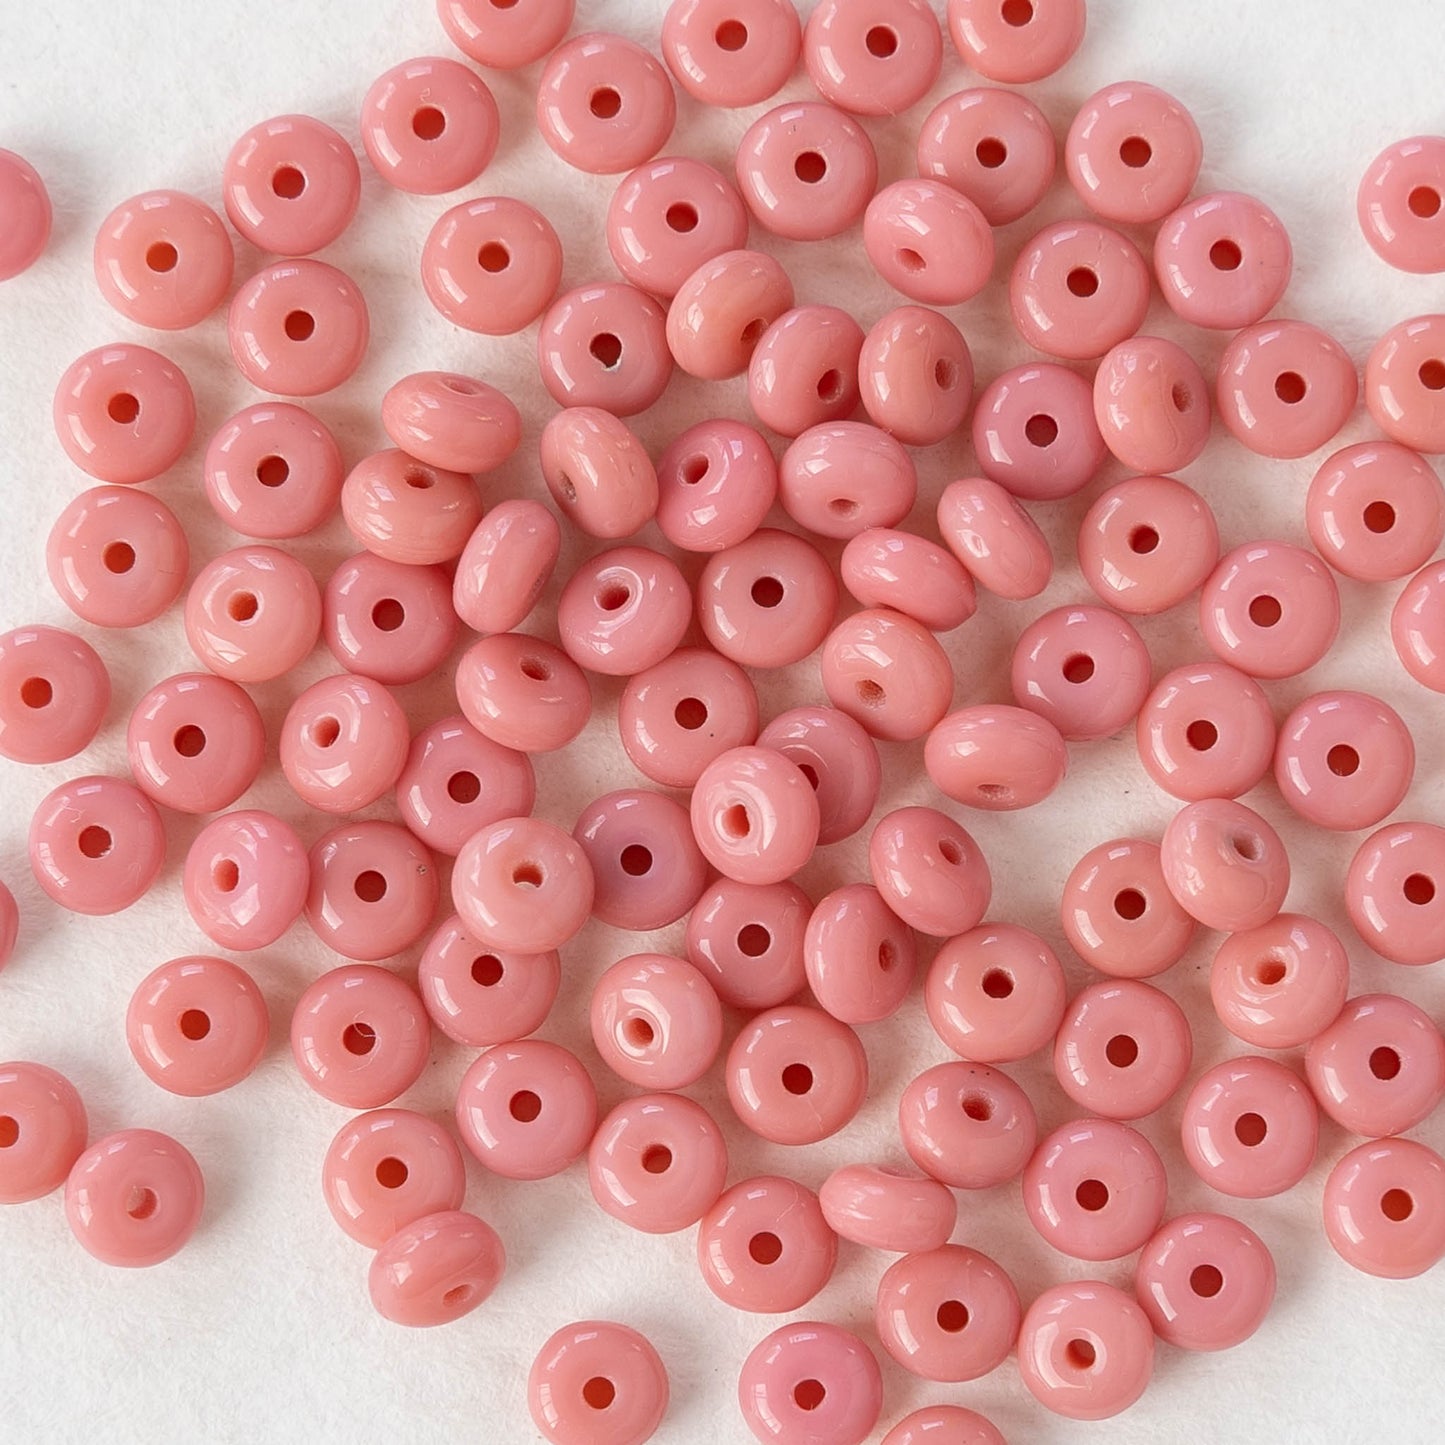 4mm Rondelle Beads - Opaque Dusty Pink - 50 beads